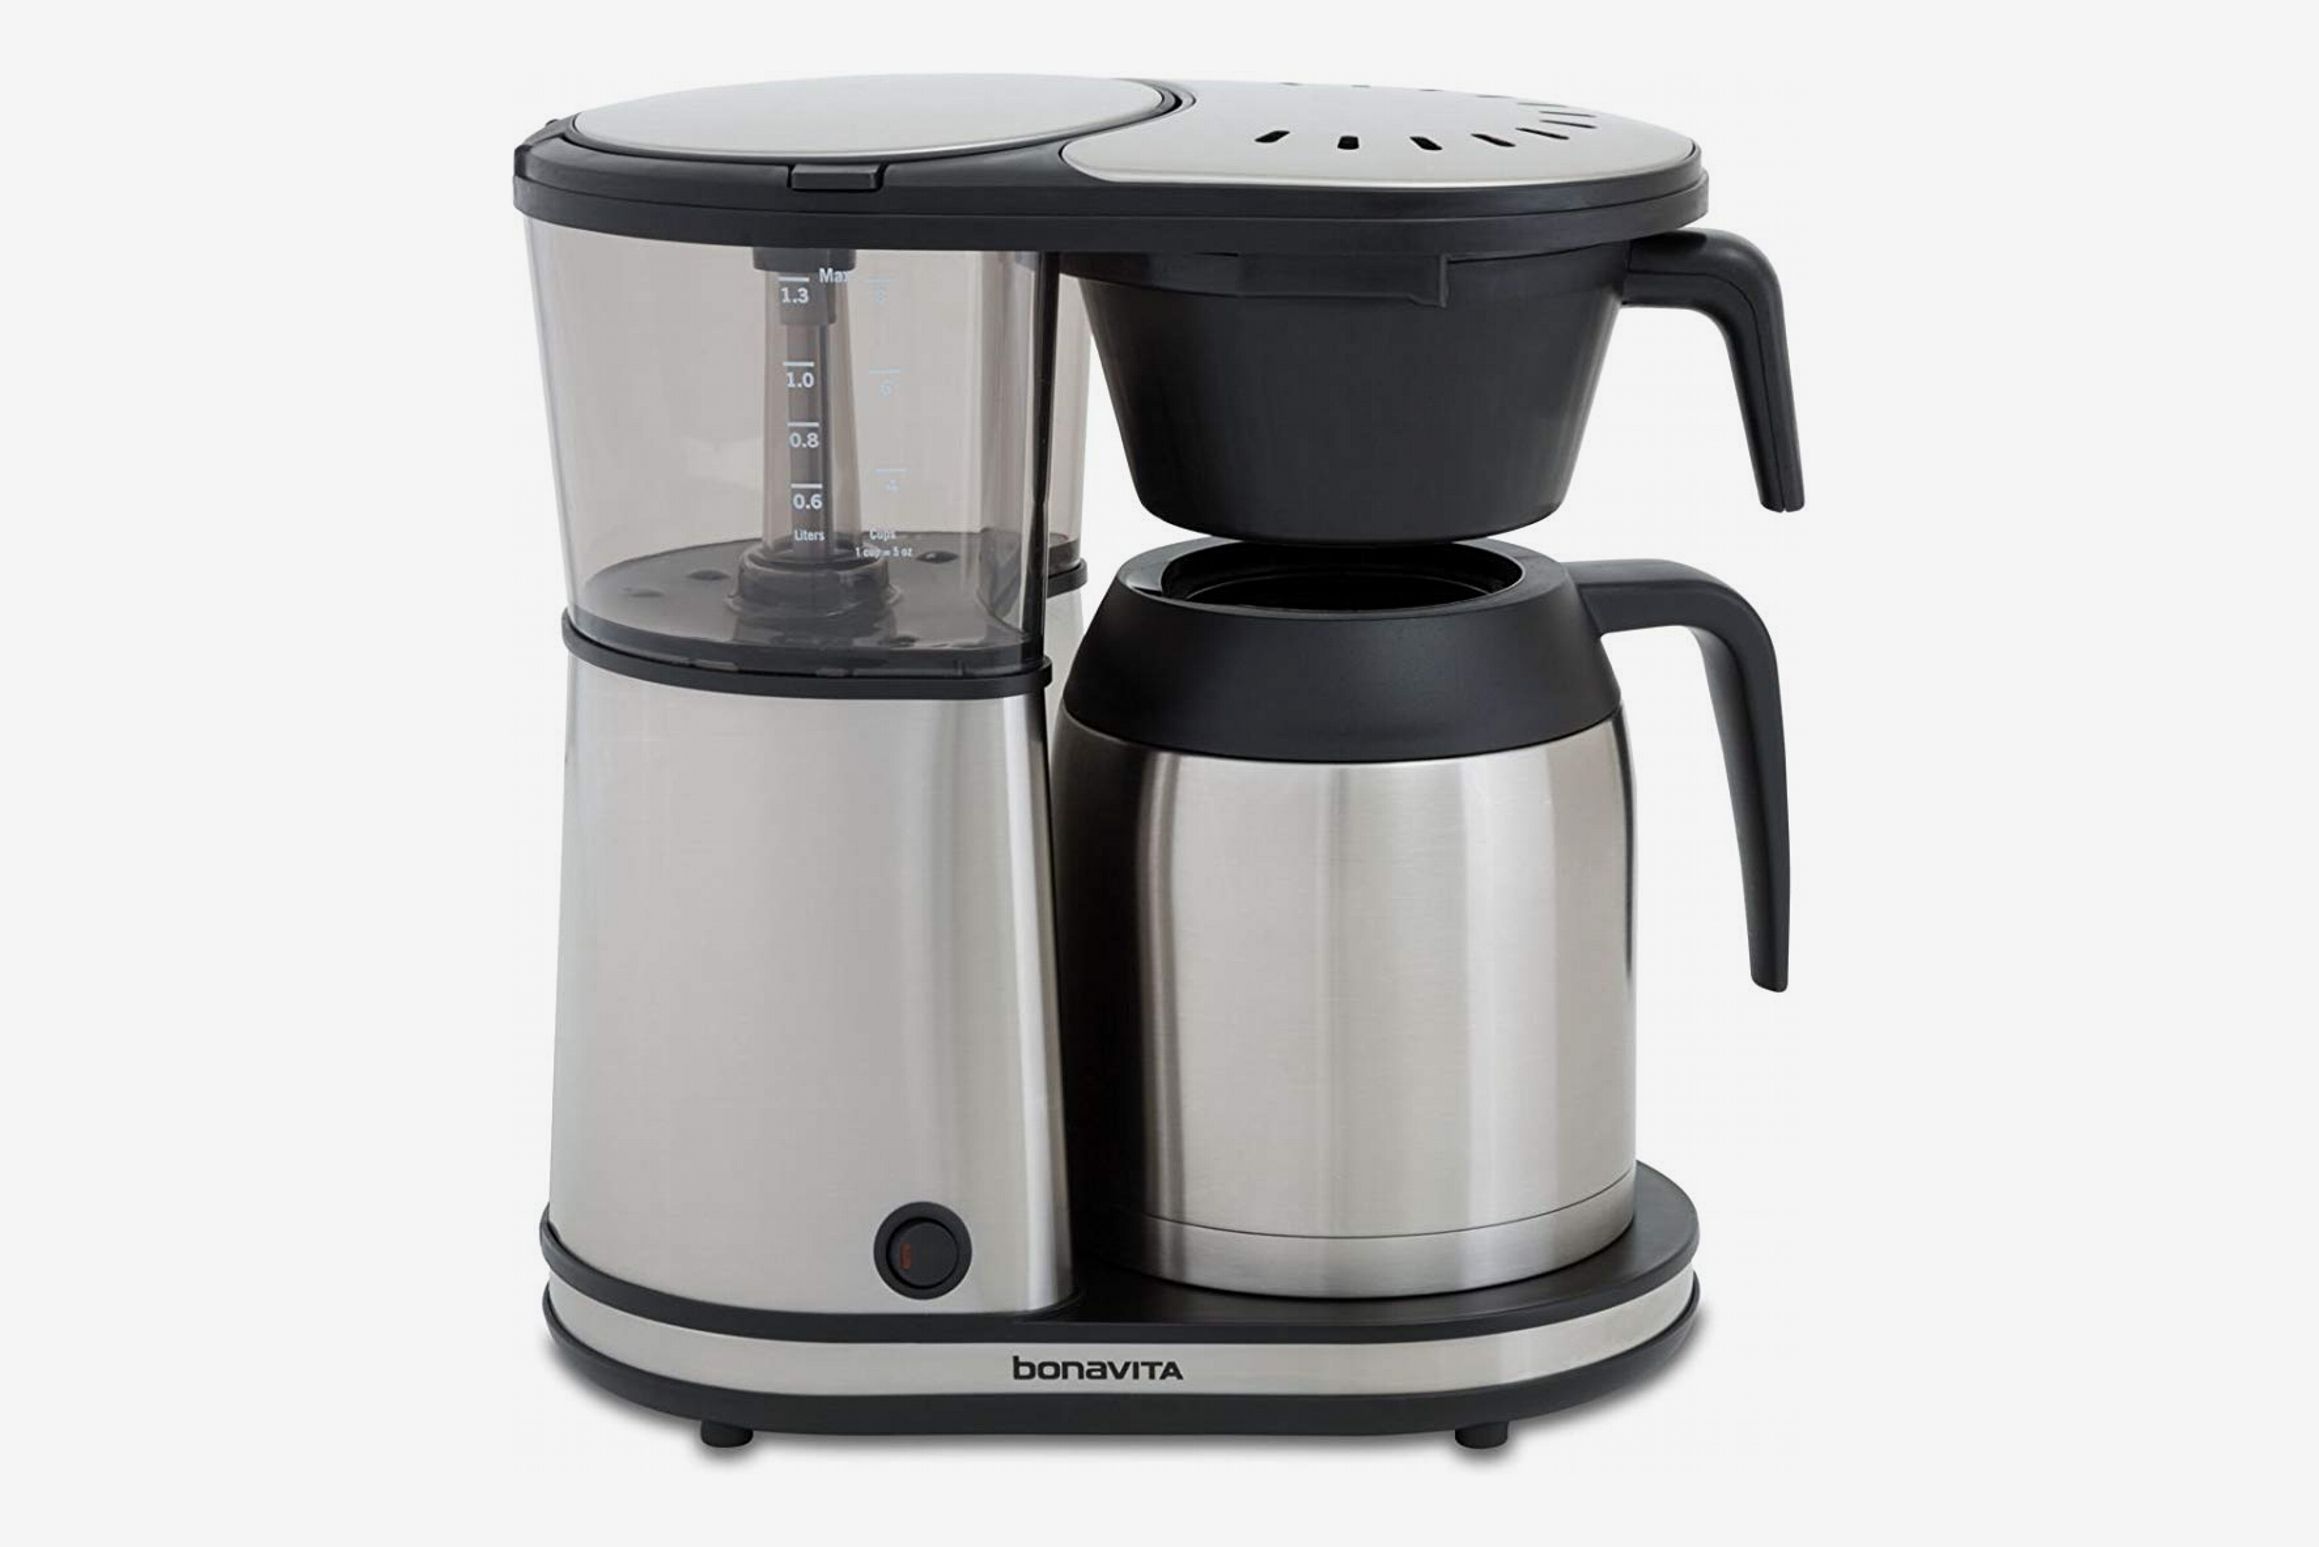 Retro Style 8-Cup* Coffeemaker | White & Stainless Steel